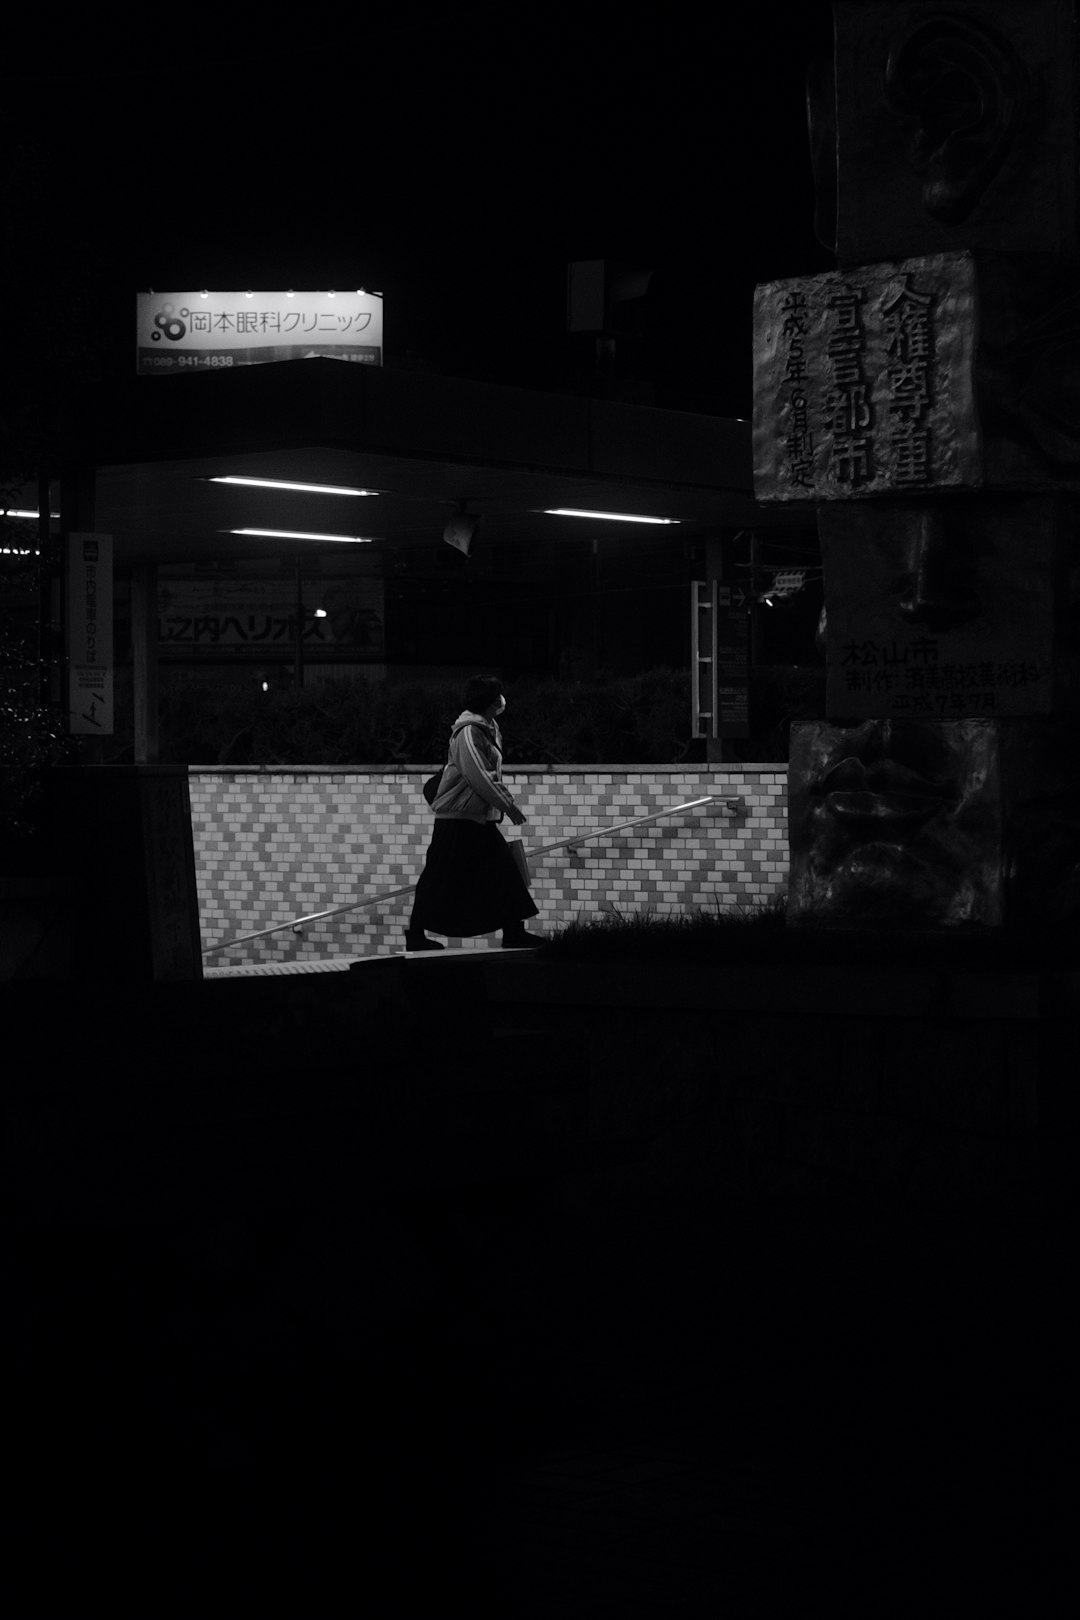 woman in black and white dress standing near white and black concrete building during nighttime